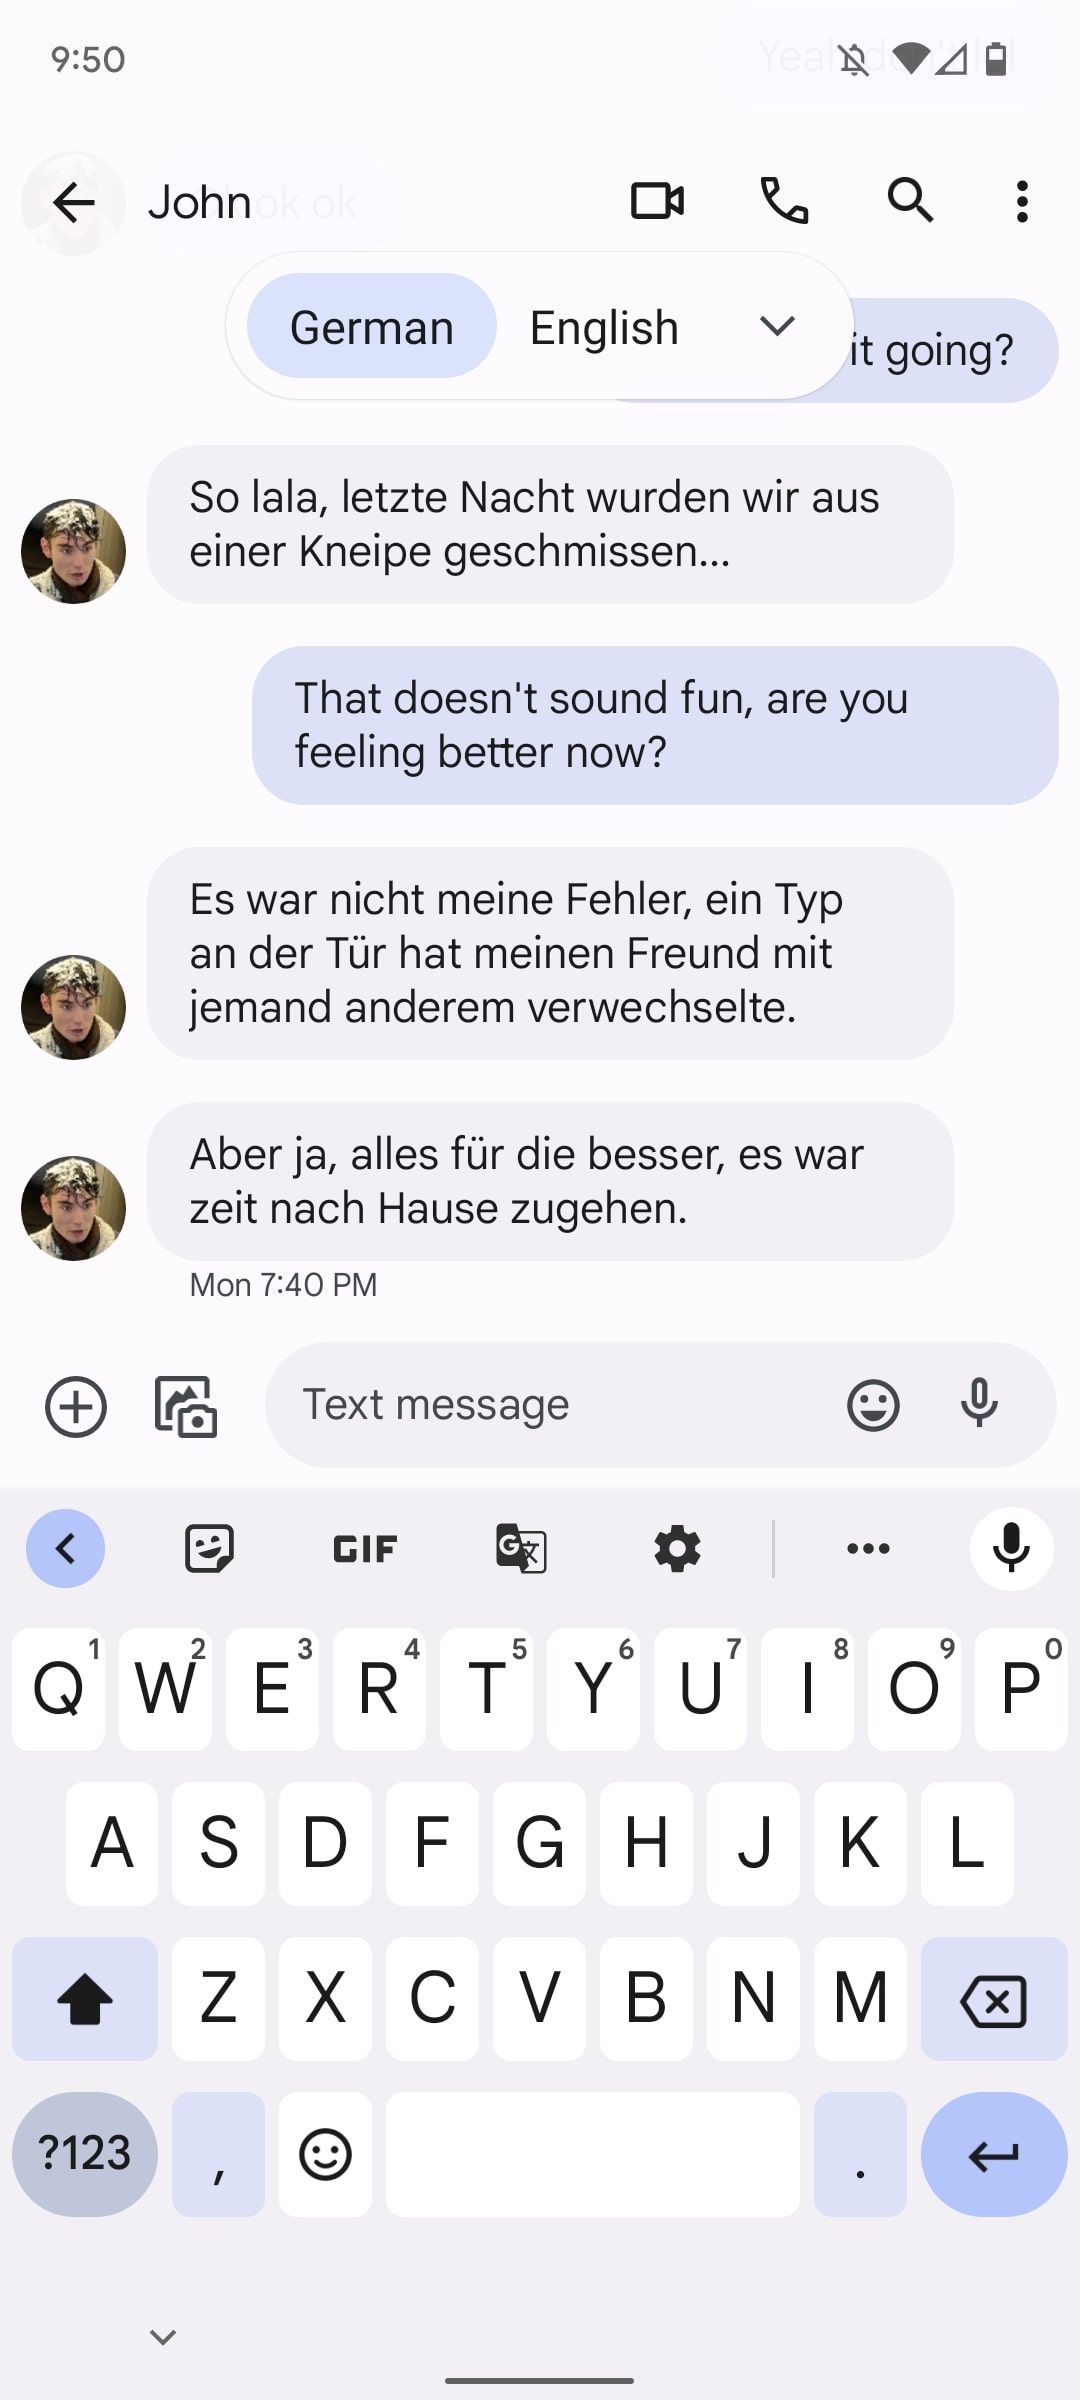 A text message conversation showing the available languages.